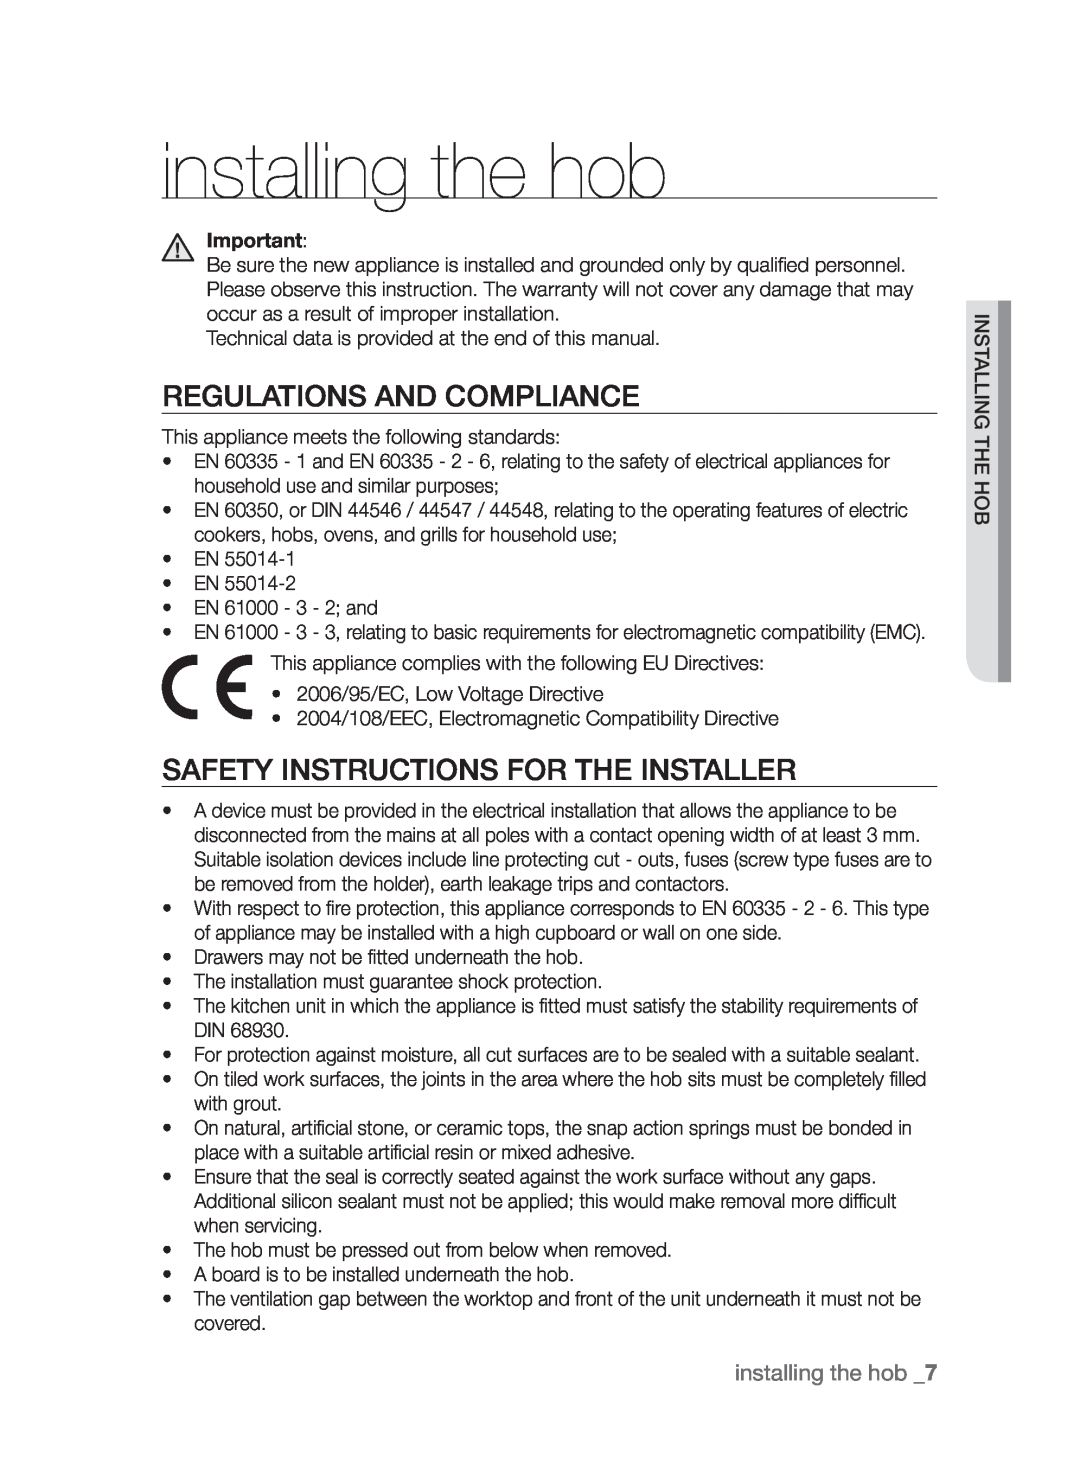 Samsung CTI613GI user manual installing the hob, Regulations and compliance, Safety instructions for the installer 